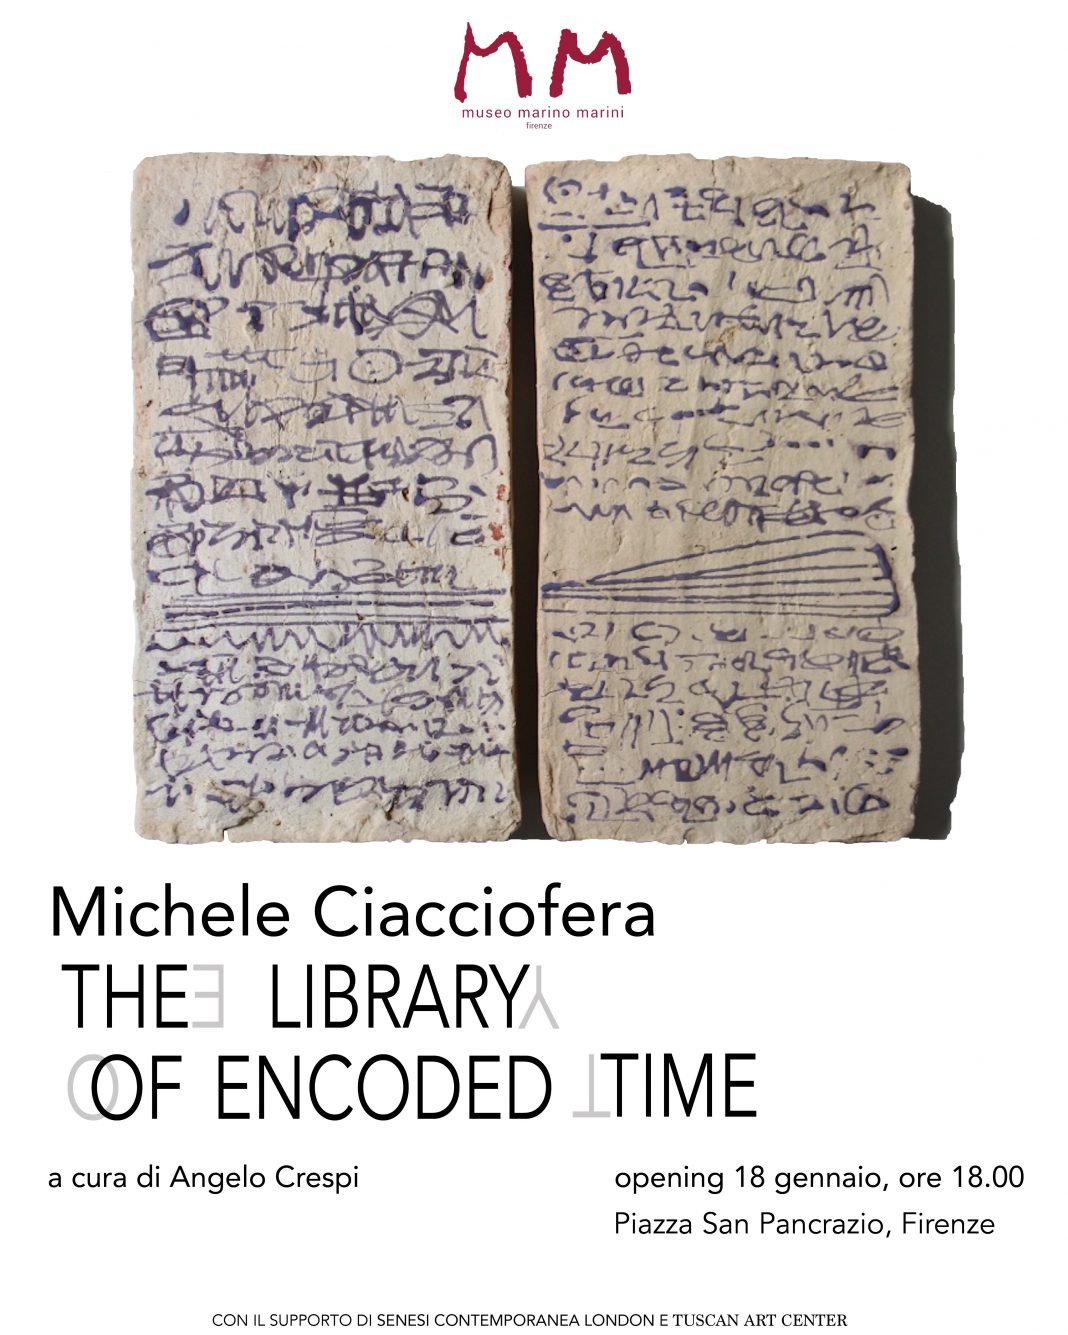 Michele Ciacciofera – The library of encoded timehttps://www.exibart.com/repository/media/2020/01/unnamed-1-2-1068x1335.jpg